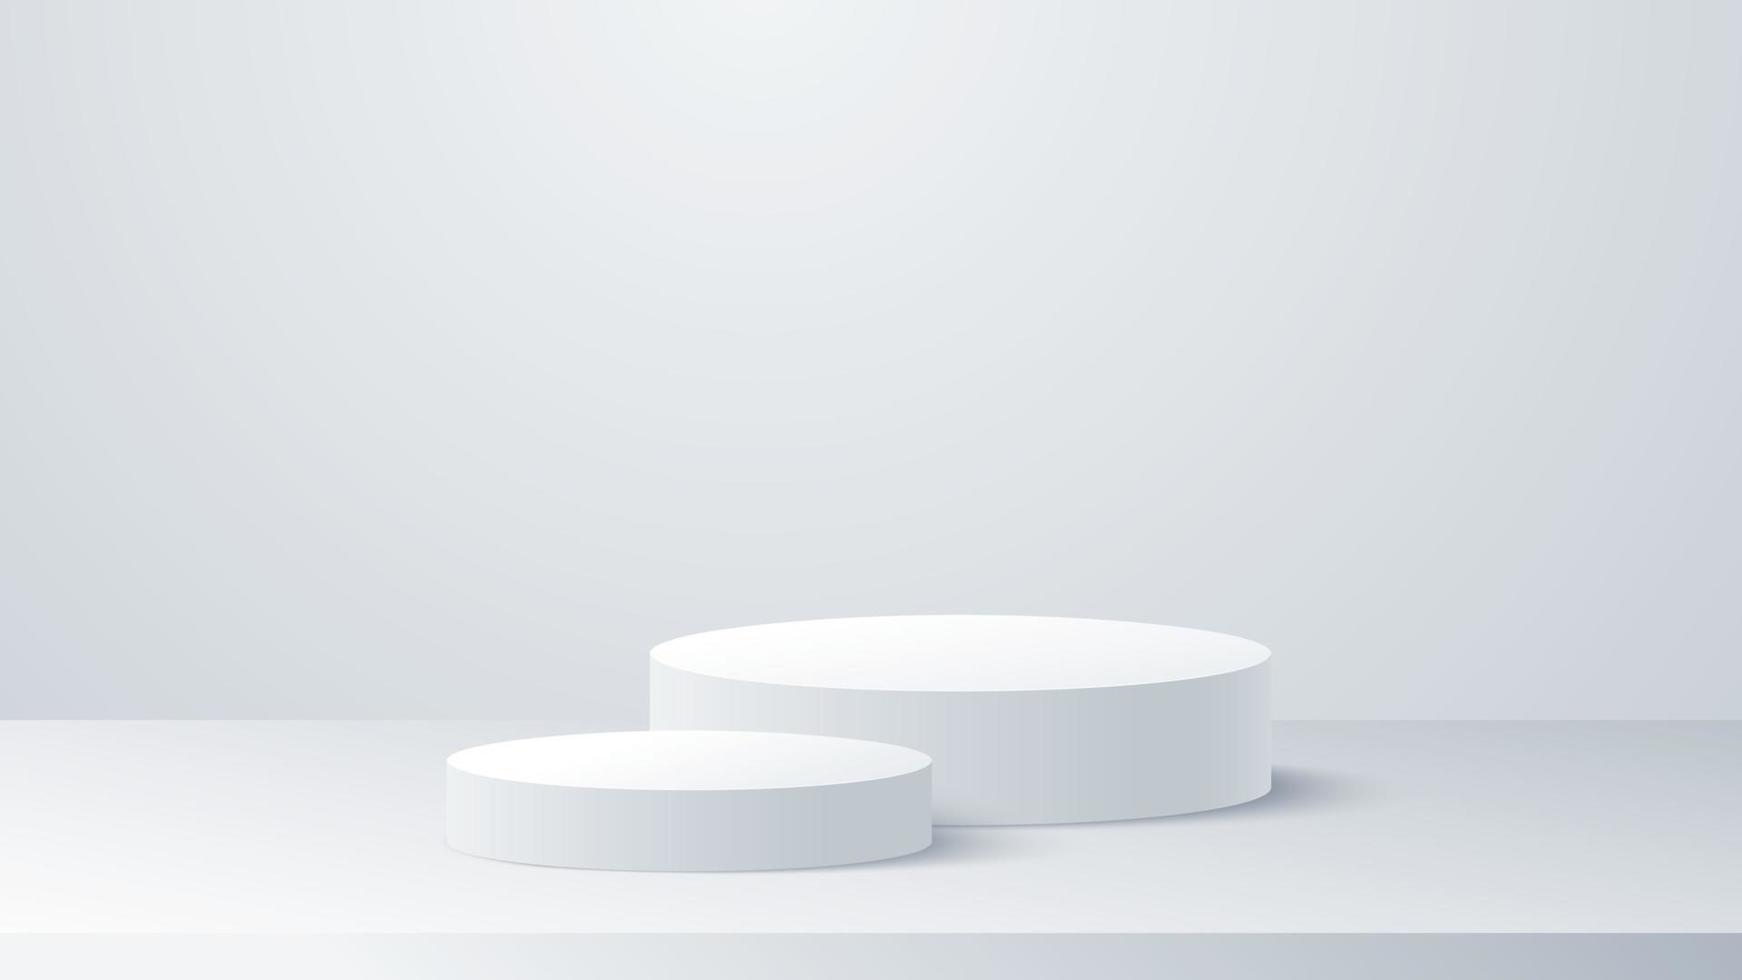 White-gray podium pedestal product display abstract vector background.